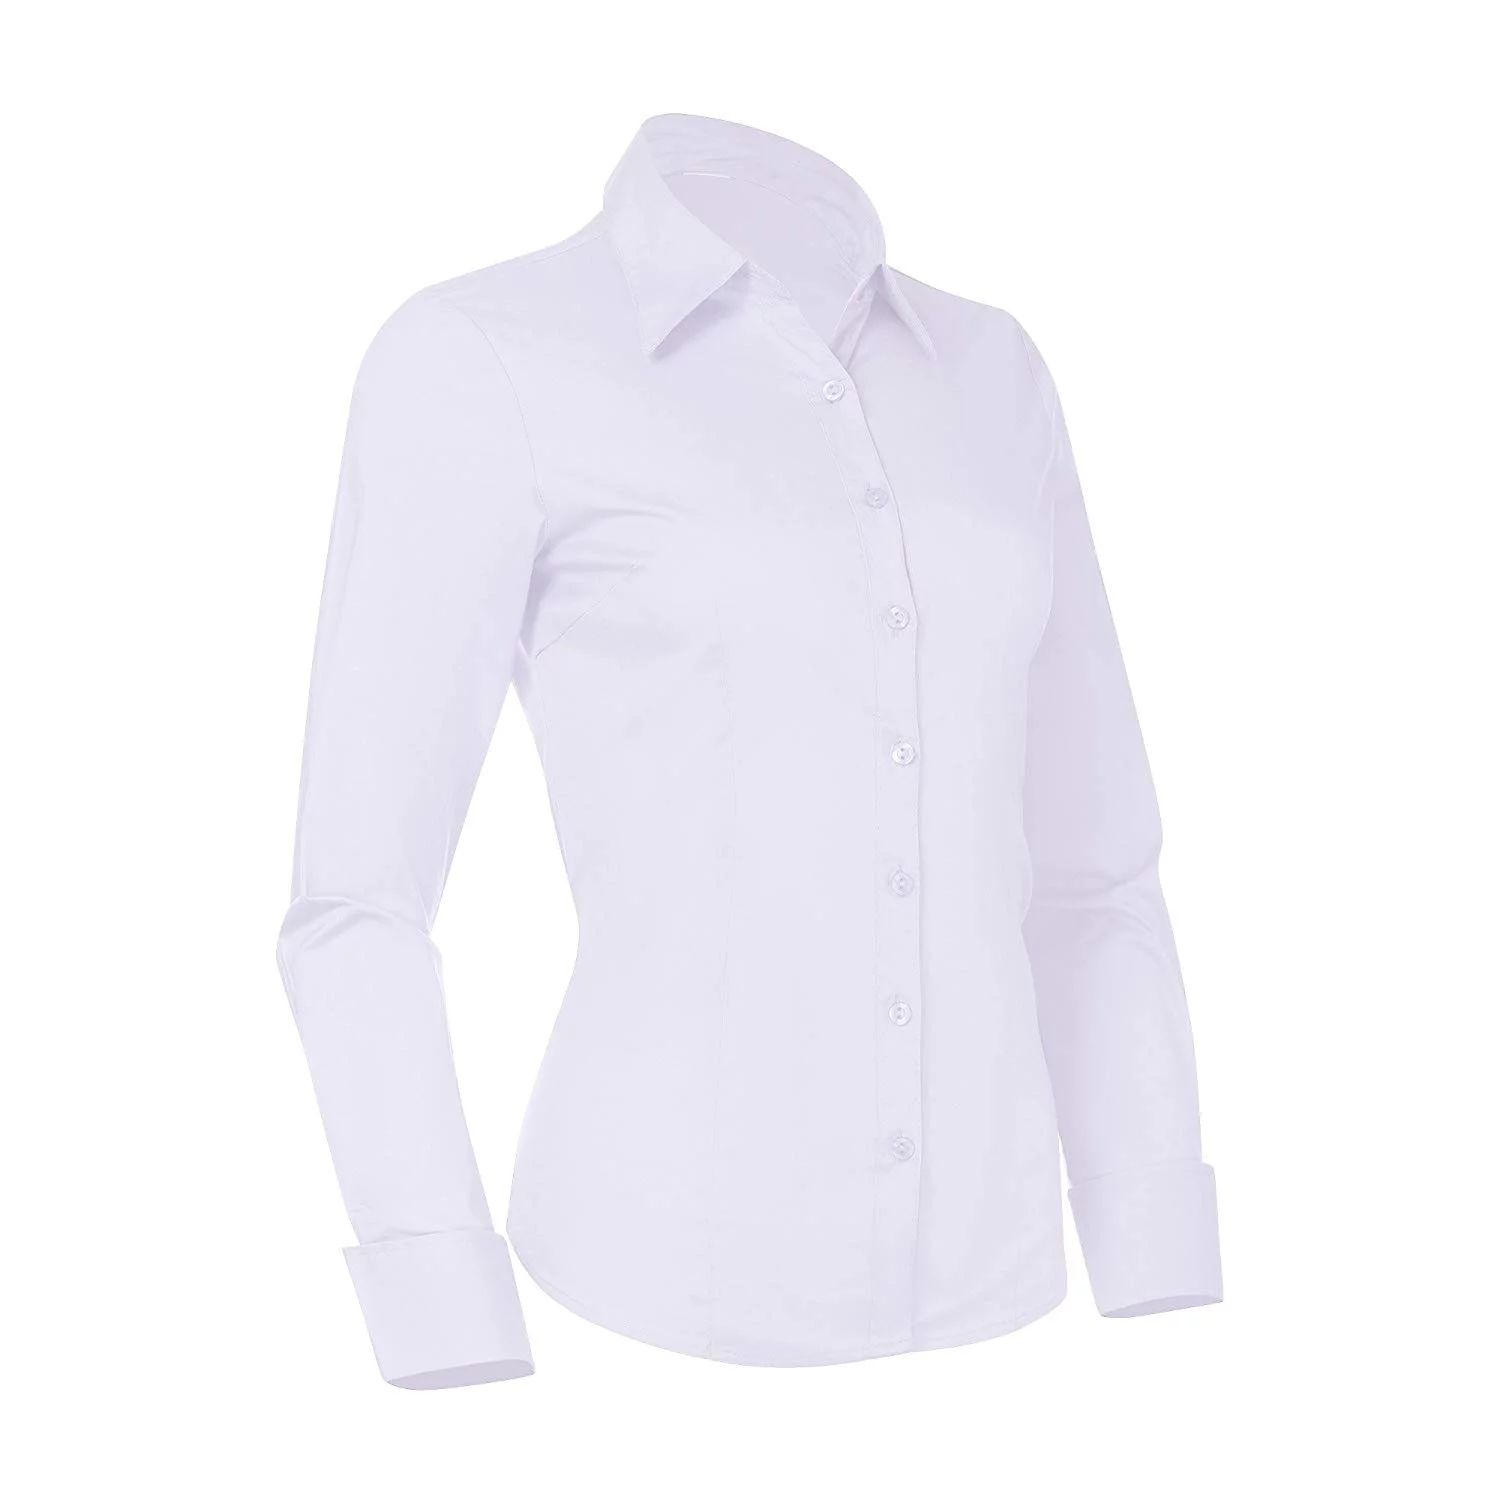 Pier 17 Button Down Shirts for Women, Fitted Long Sleeve Tailored Shirt Blouse (X-Small, White) -... | Walmart (US)